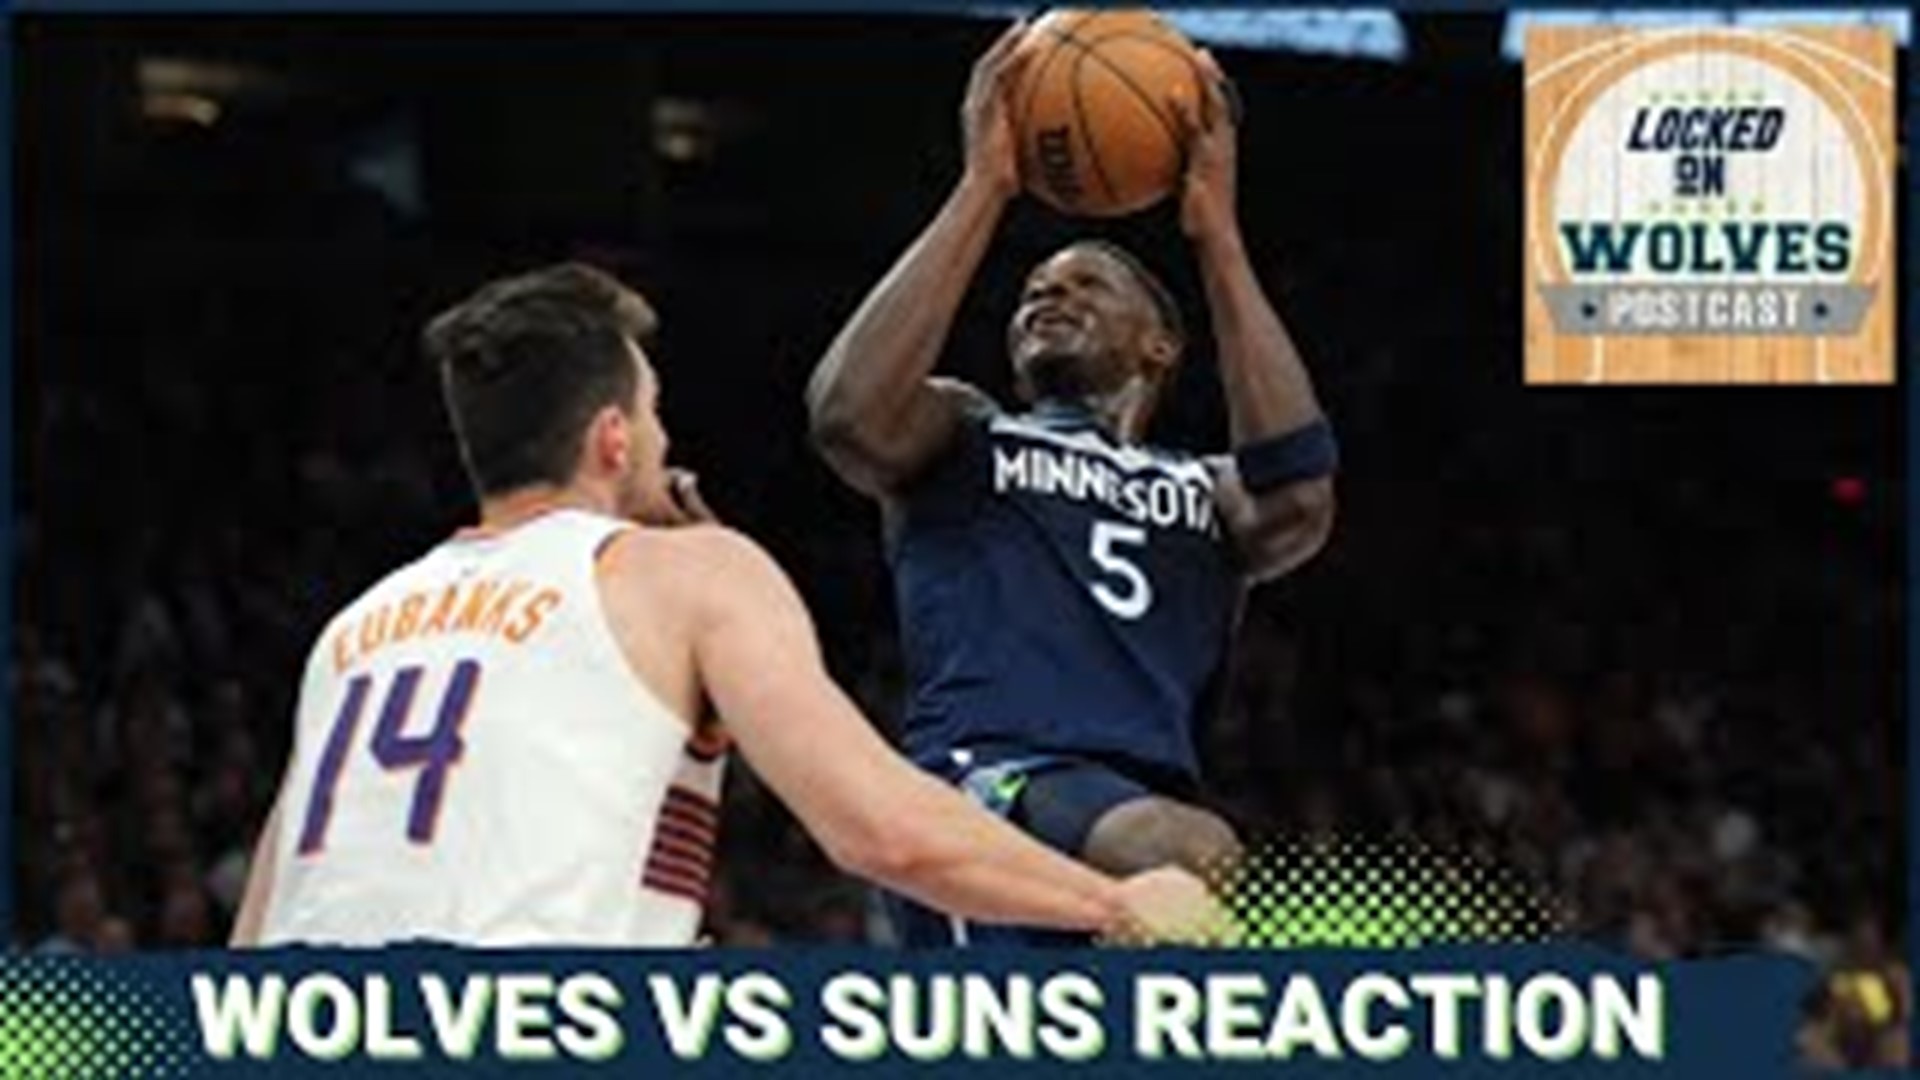 The Minnesota Timberwolves lose to the Phoenix Suns in large part to 19 turnovers, 97-87. Join Luke Inman and Jack Borman for the instant reaction and breakdown.